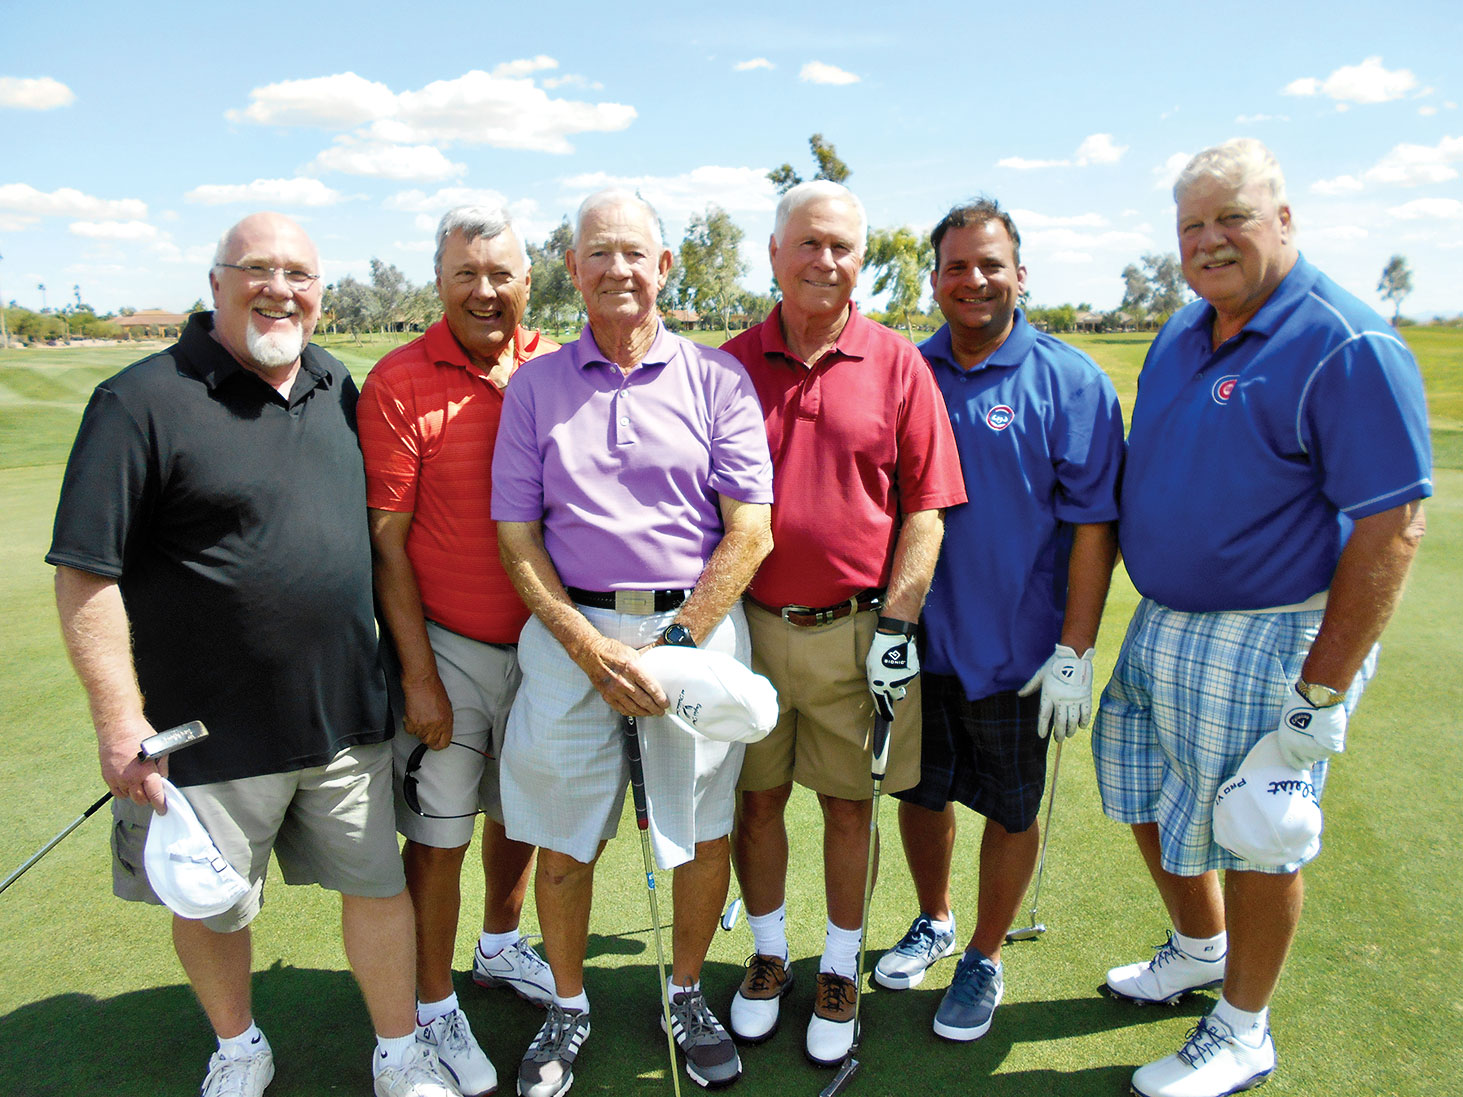 Member-Guest Traditional Format Flight Winners, left to right: Andy Ogens, Jerry White, Ray Measles, Steve Ricks, Dave Marzullo and Bill Walenda